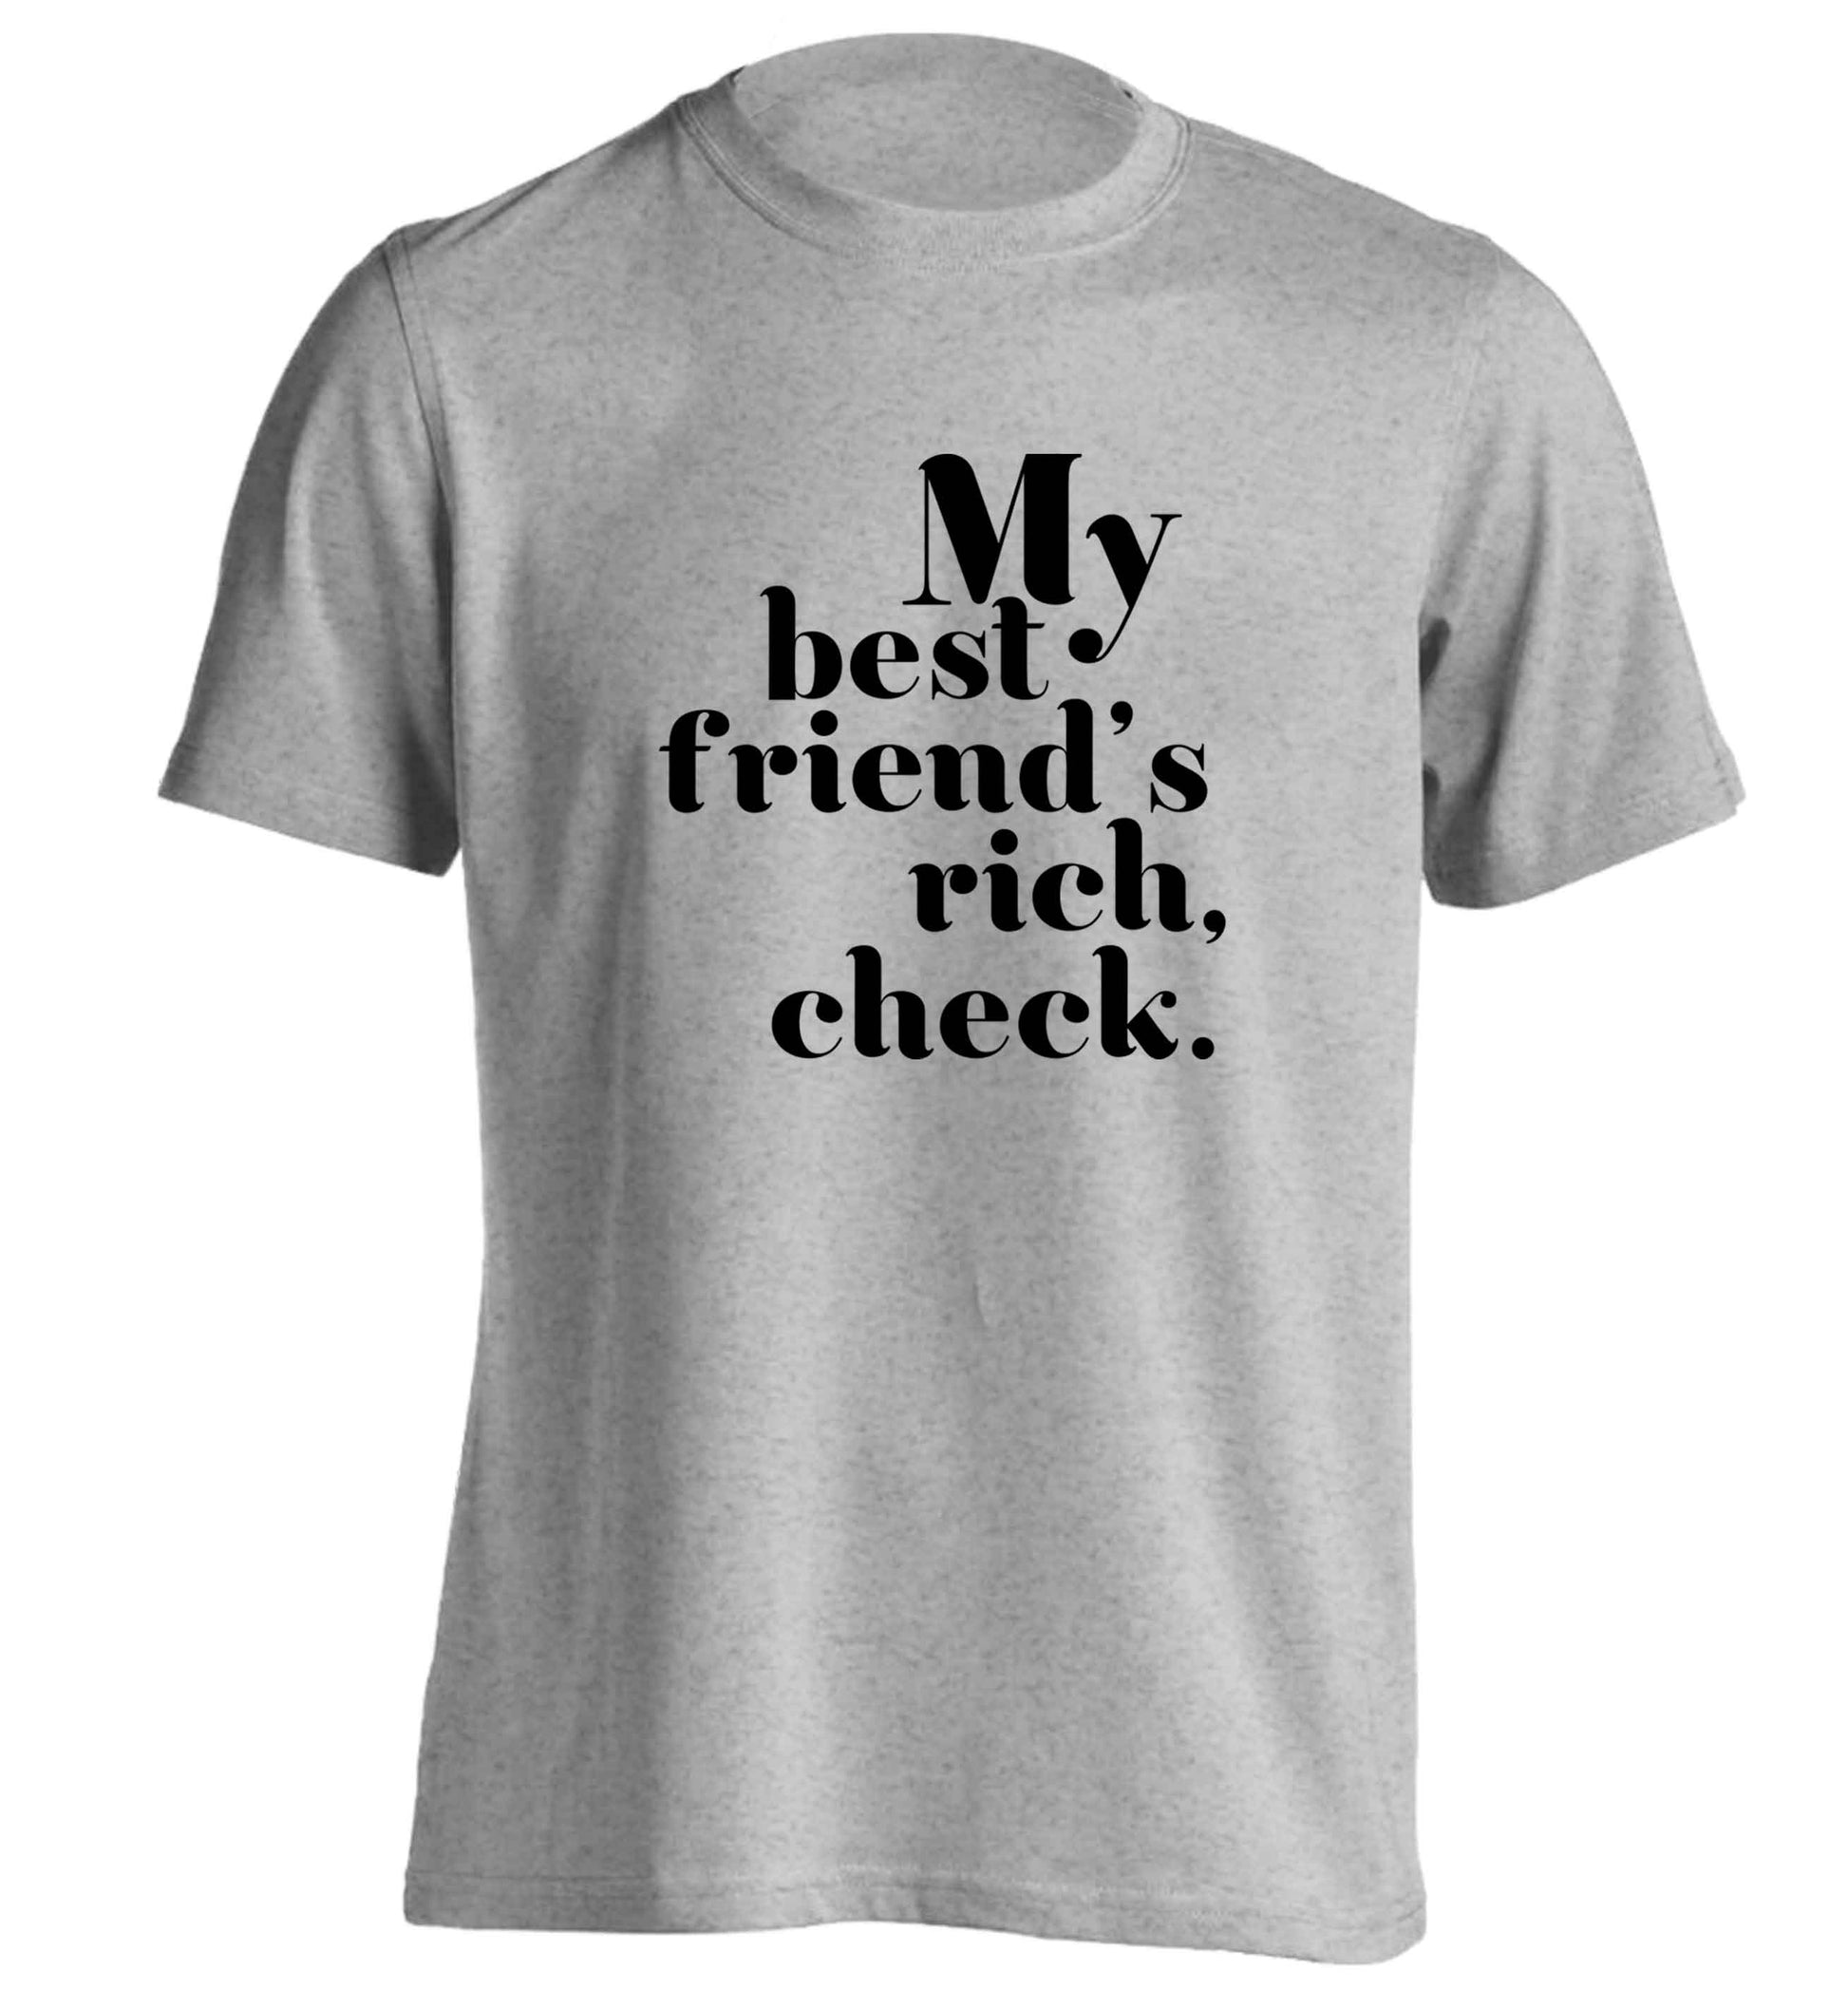 Got a rich best friend? Why not ask them to get you this, just let us  know and we'll tripple the price ;)  adults unisex grey Tshirt 2XL